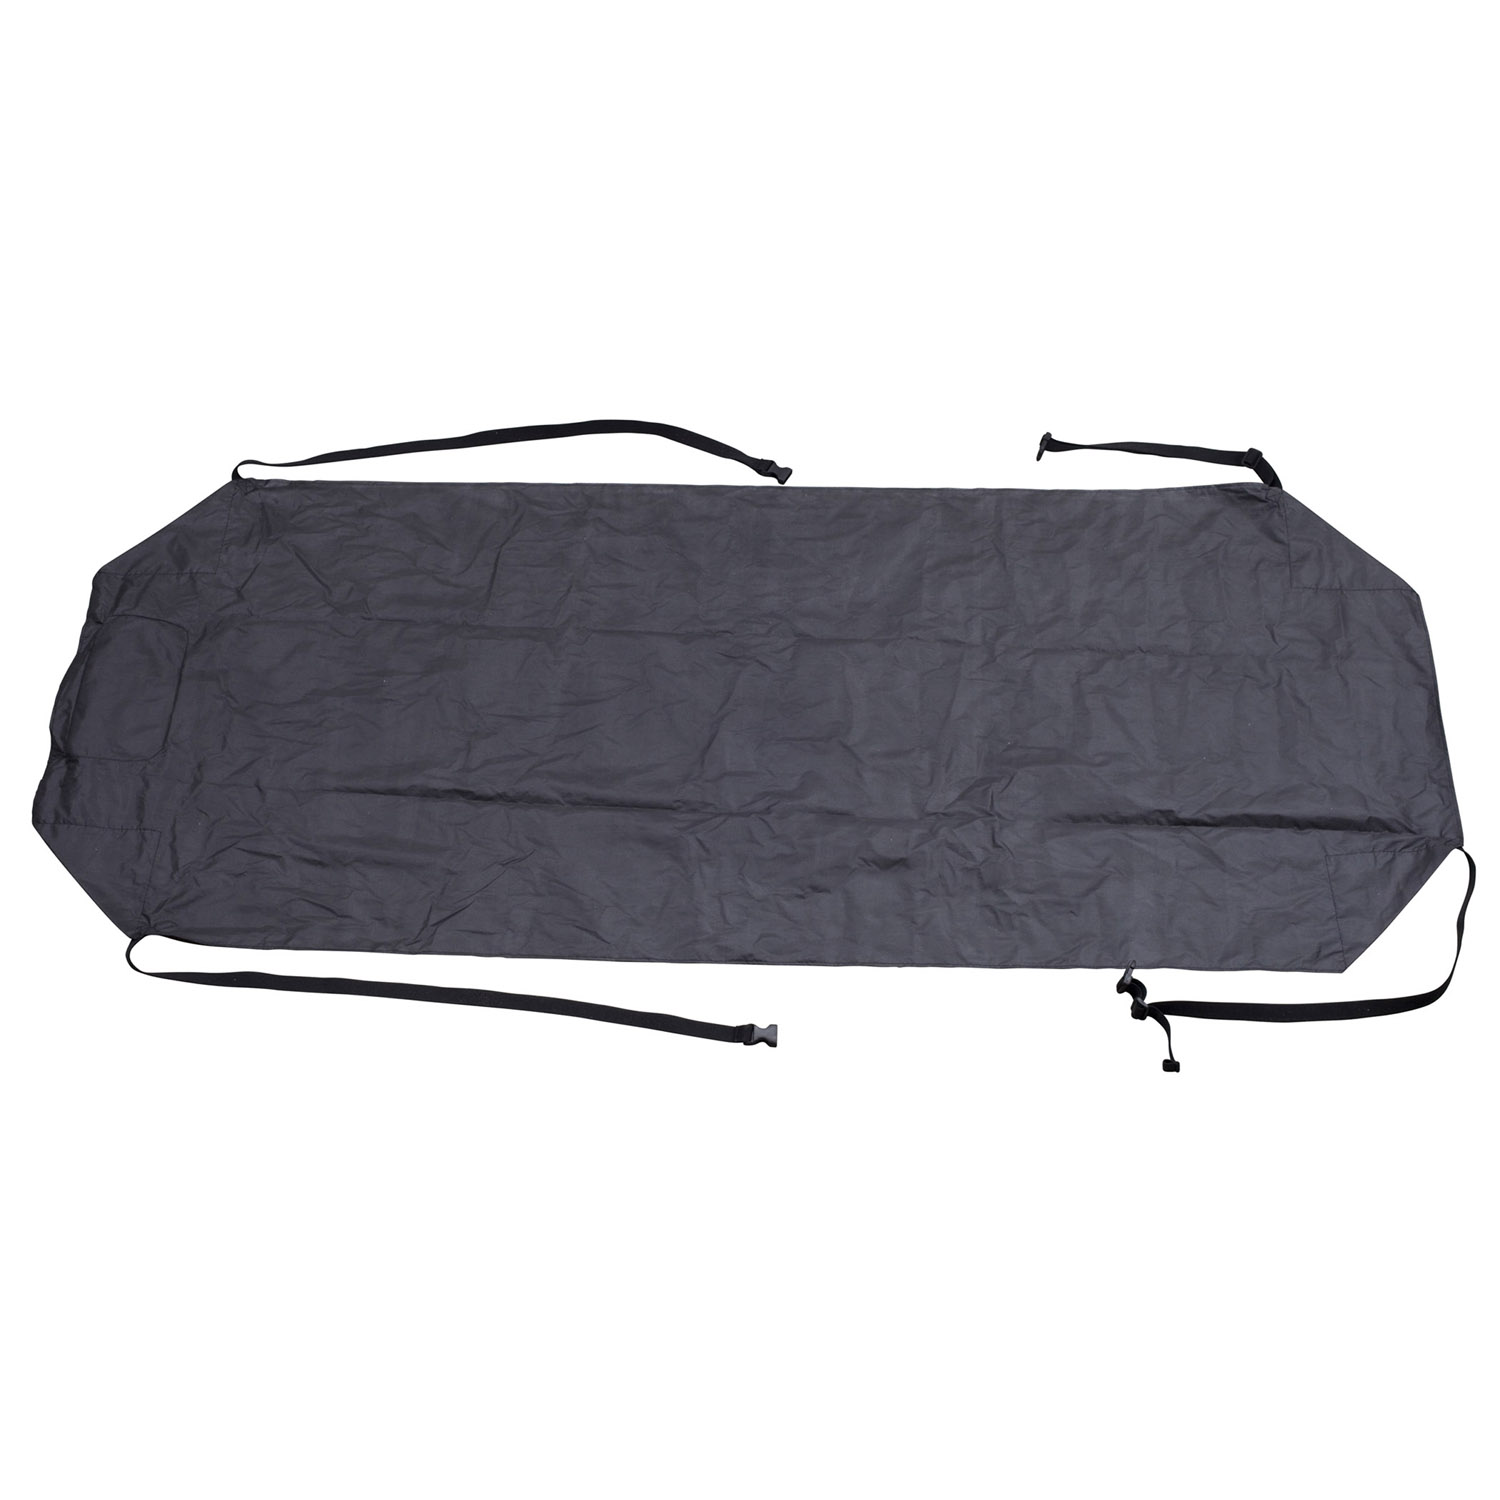 Classic Accessories Auto Windshield Cover - image 5 of 8